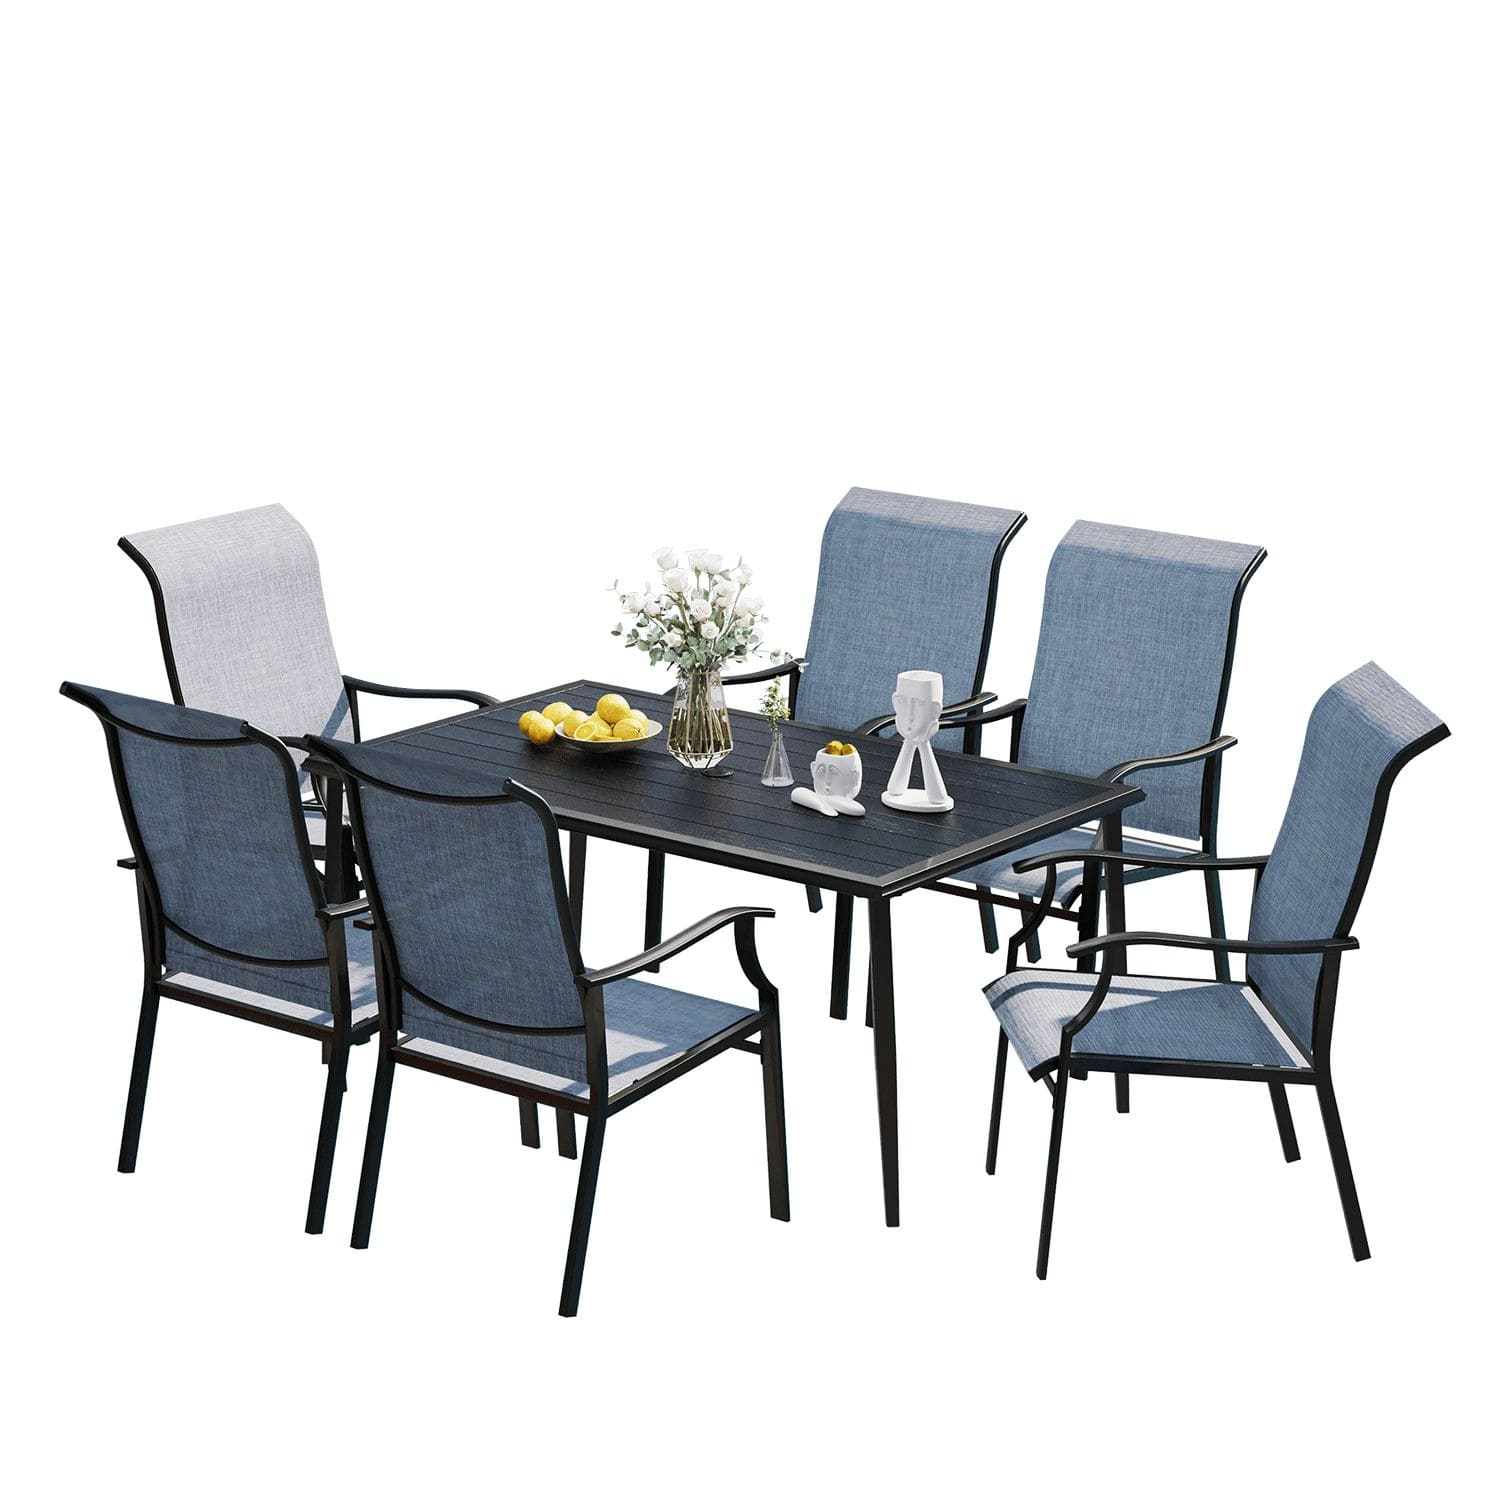 Vicllax 5/7 PCS Patio Dining Set, Large Outdoor Sling Chair and Metal Dining Table